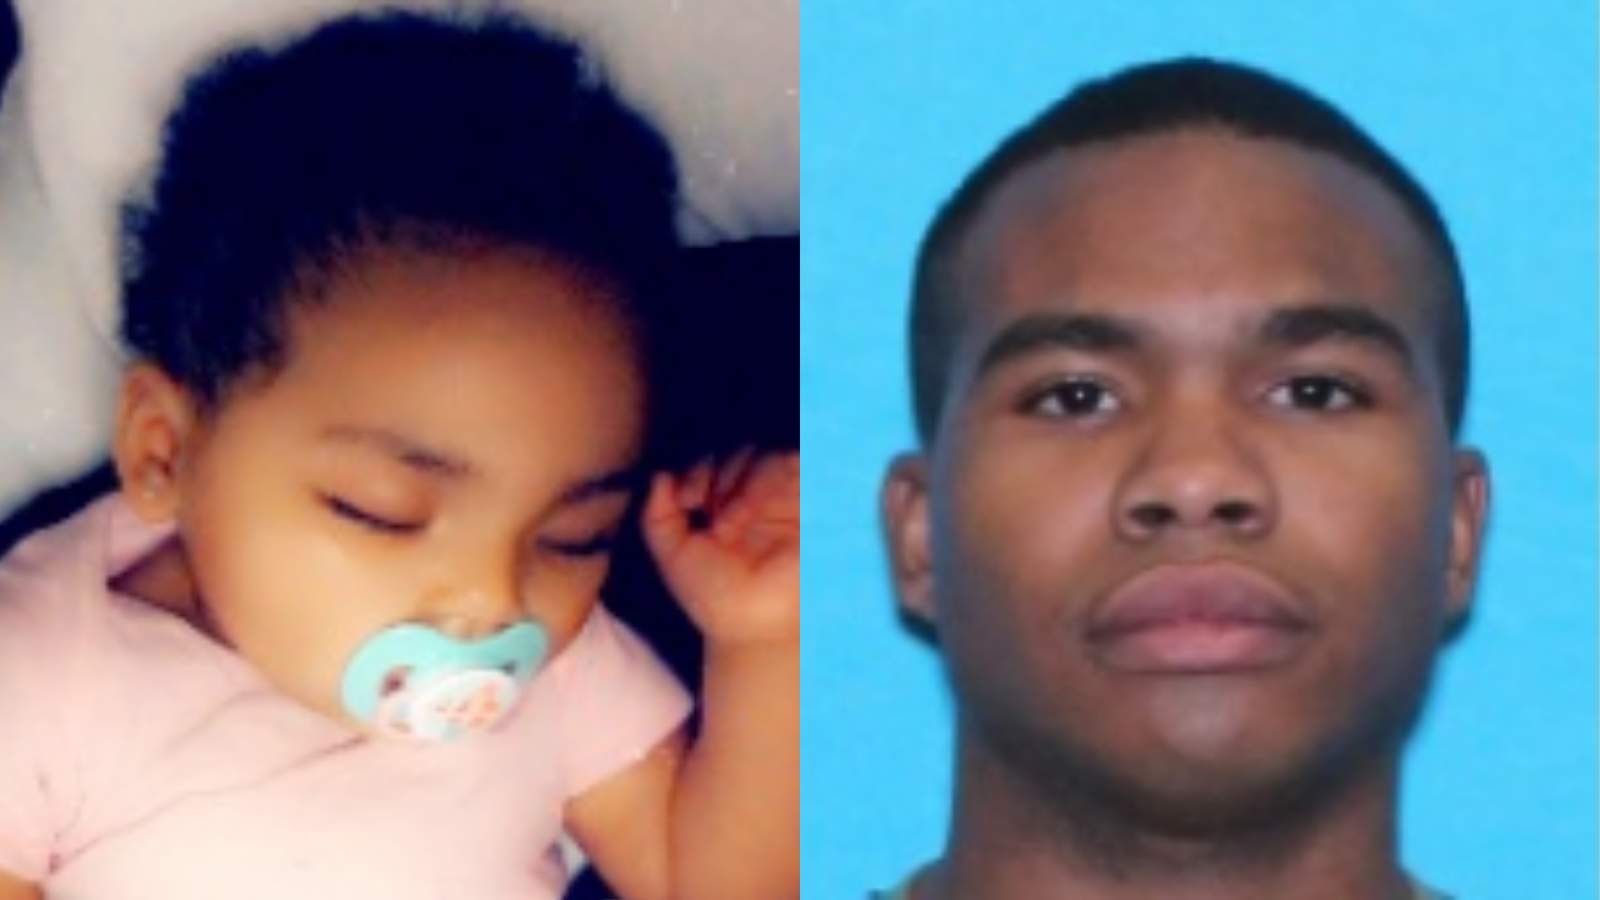 Amber Alert issued for 8-month-old girl reported missing in San Antonio; Suspect sought in connection with her disappearance